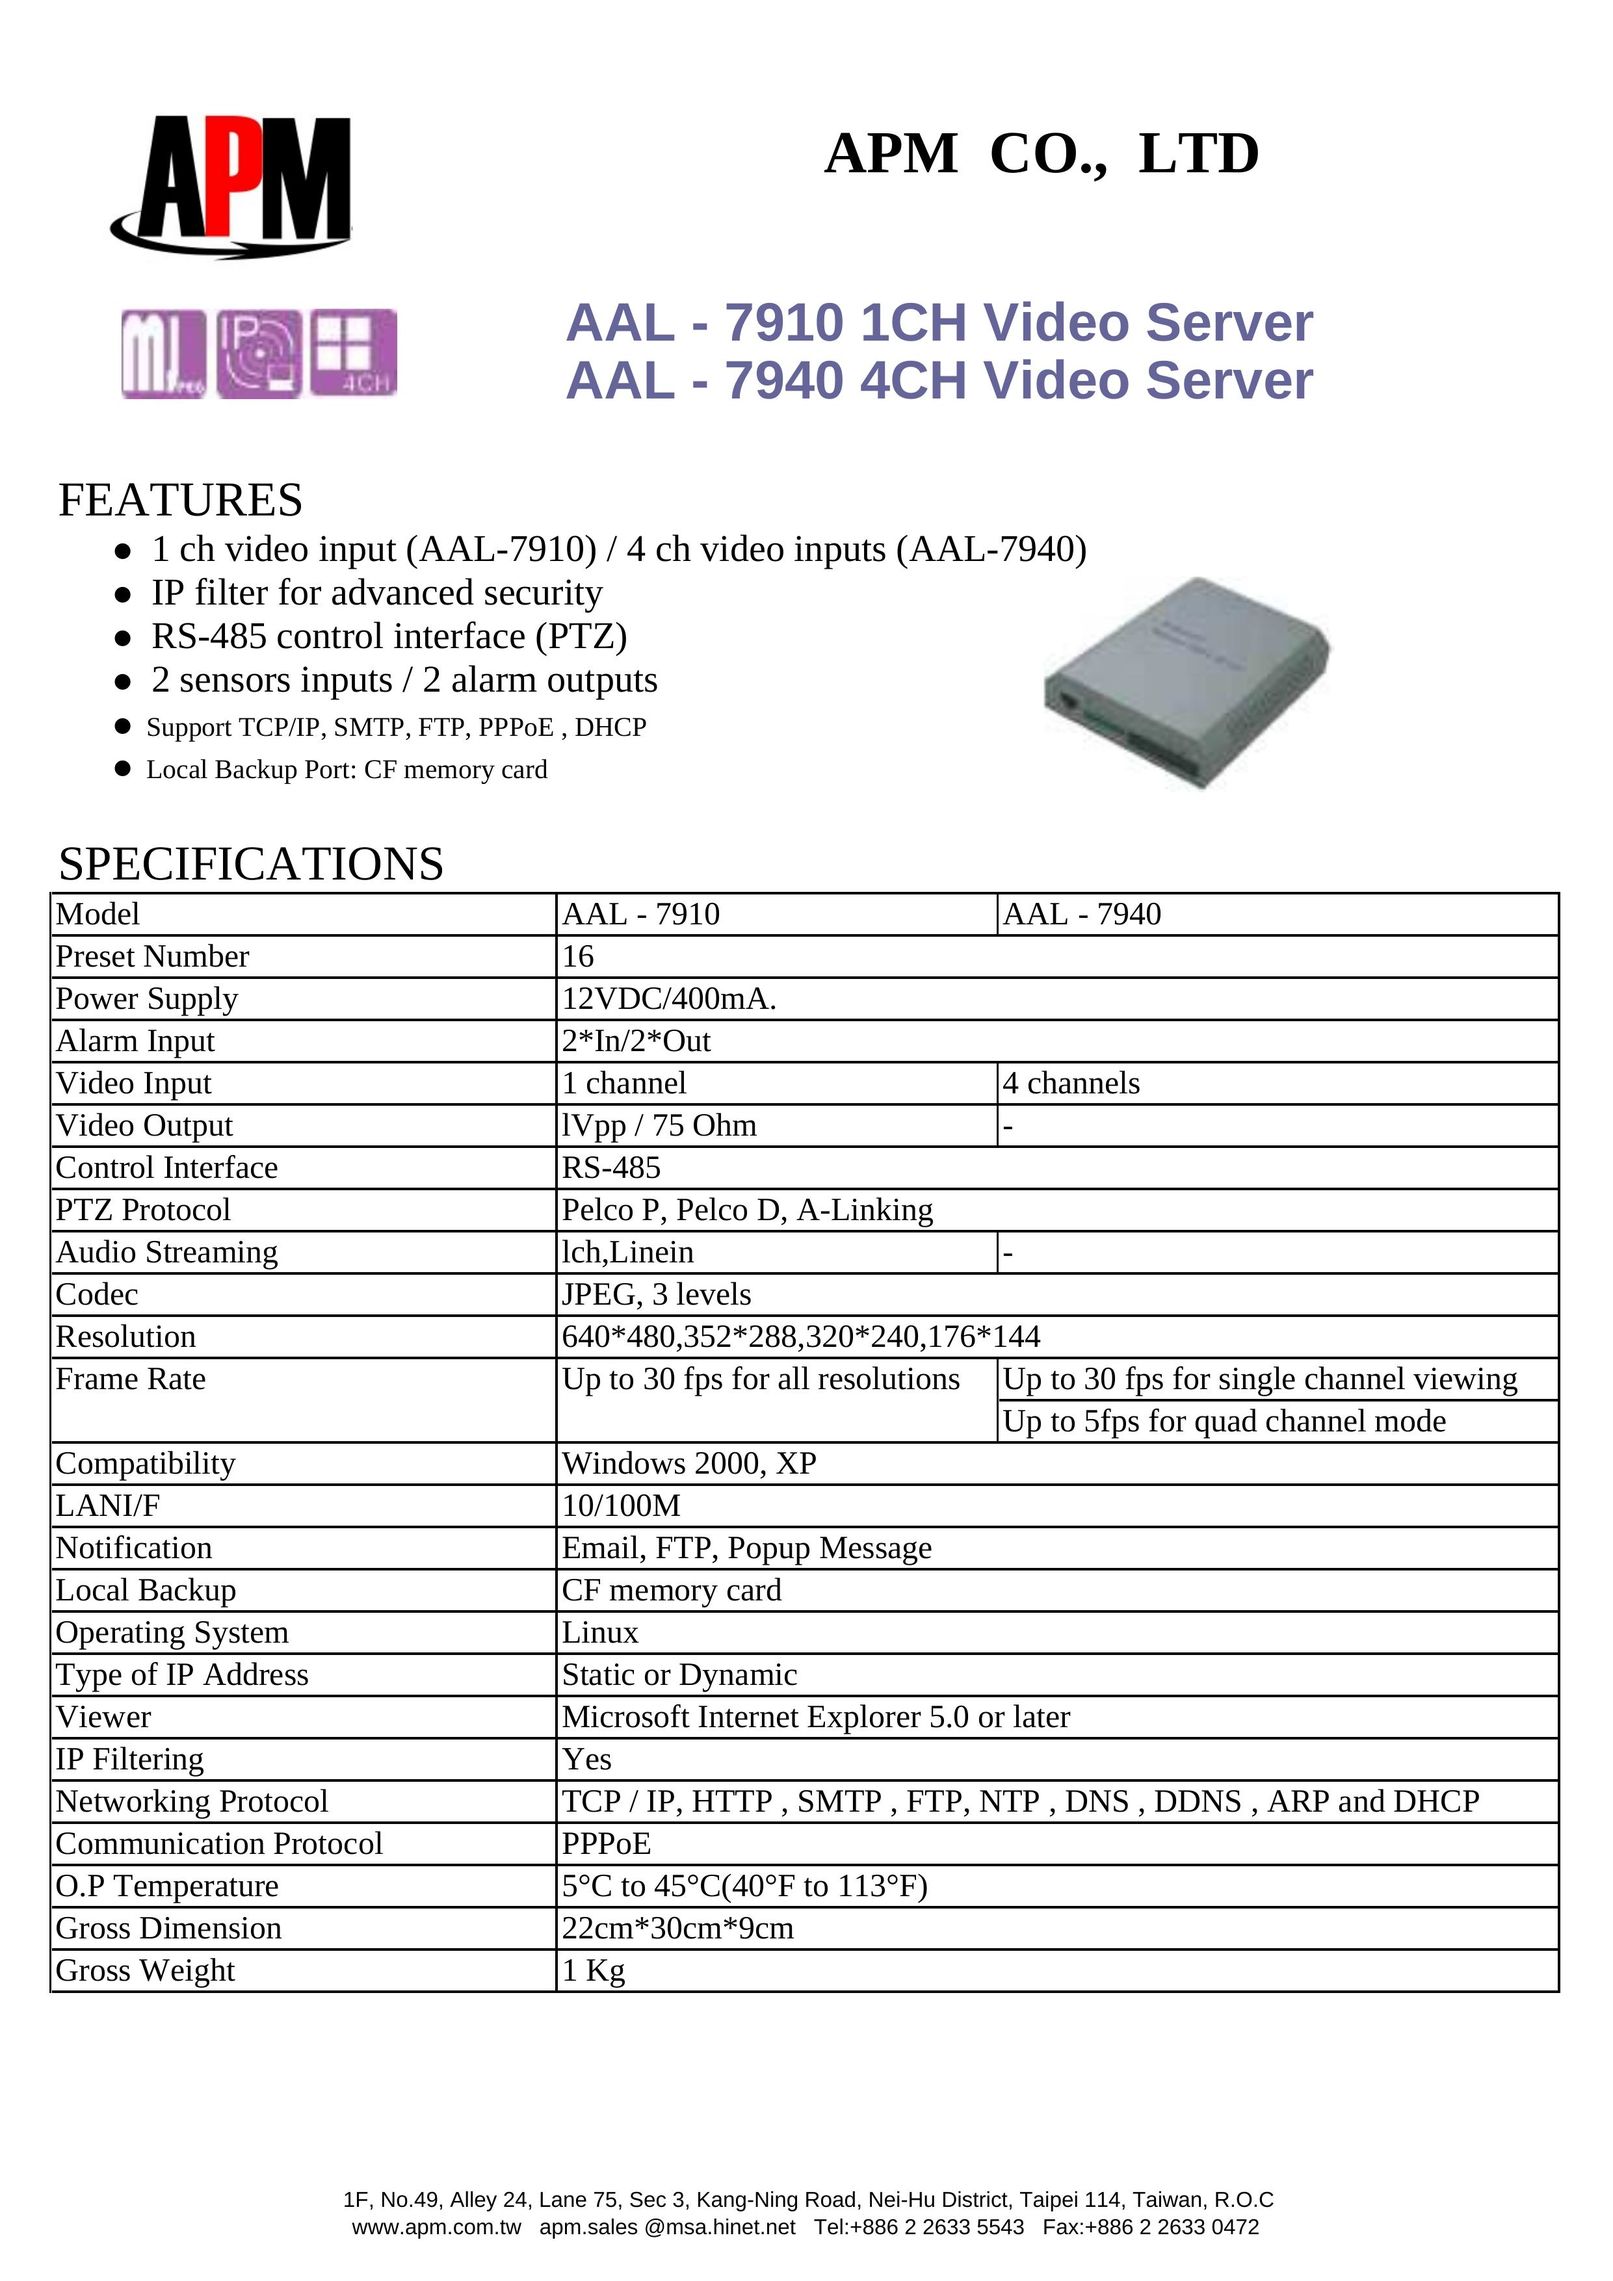 APM AAL - 7940 4CH Home Theater Server User Manual